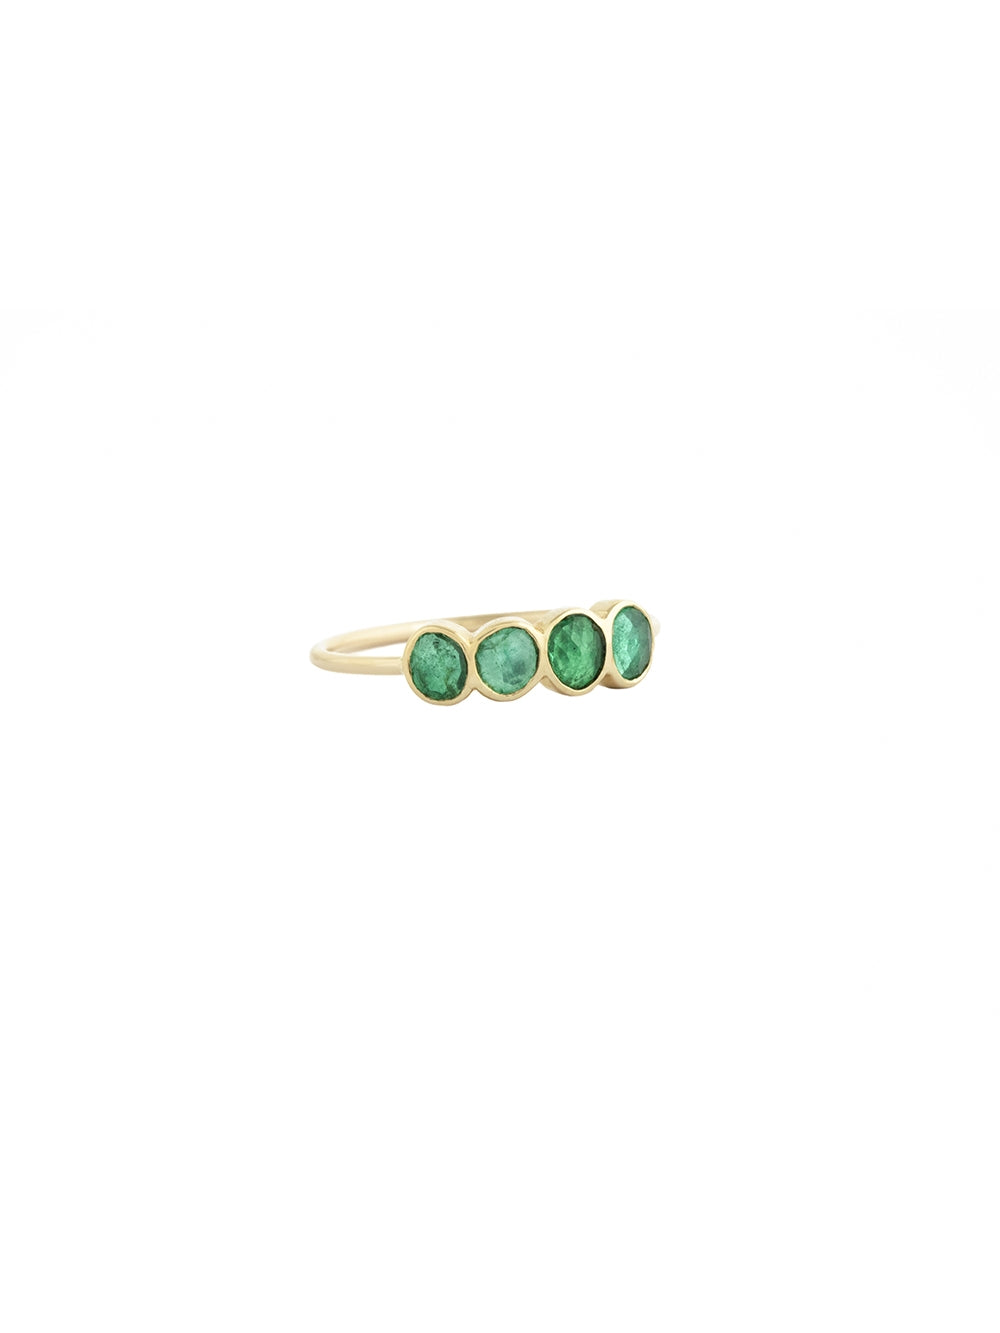 RING SET WITH 4 EMERALDS